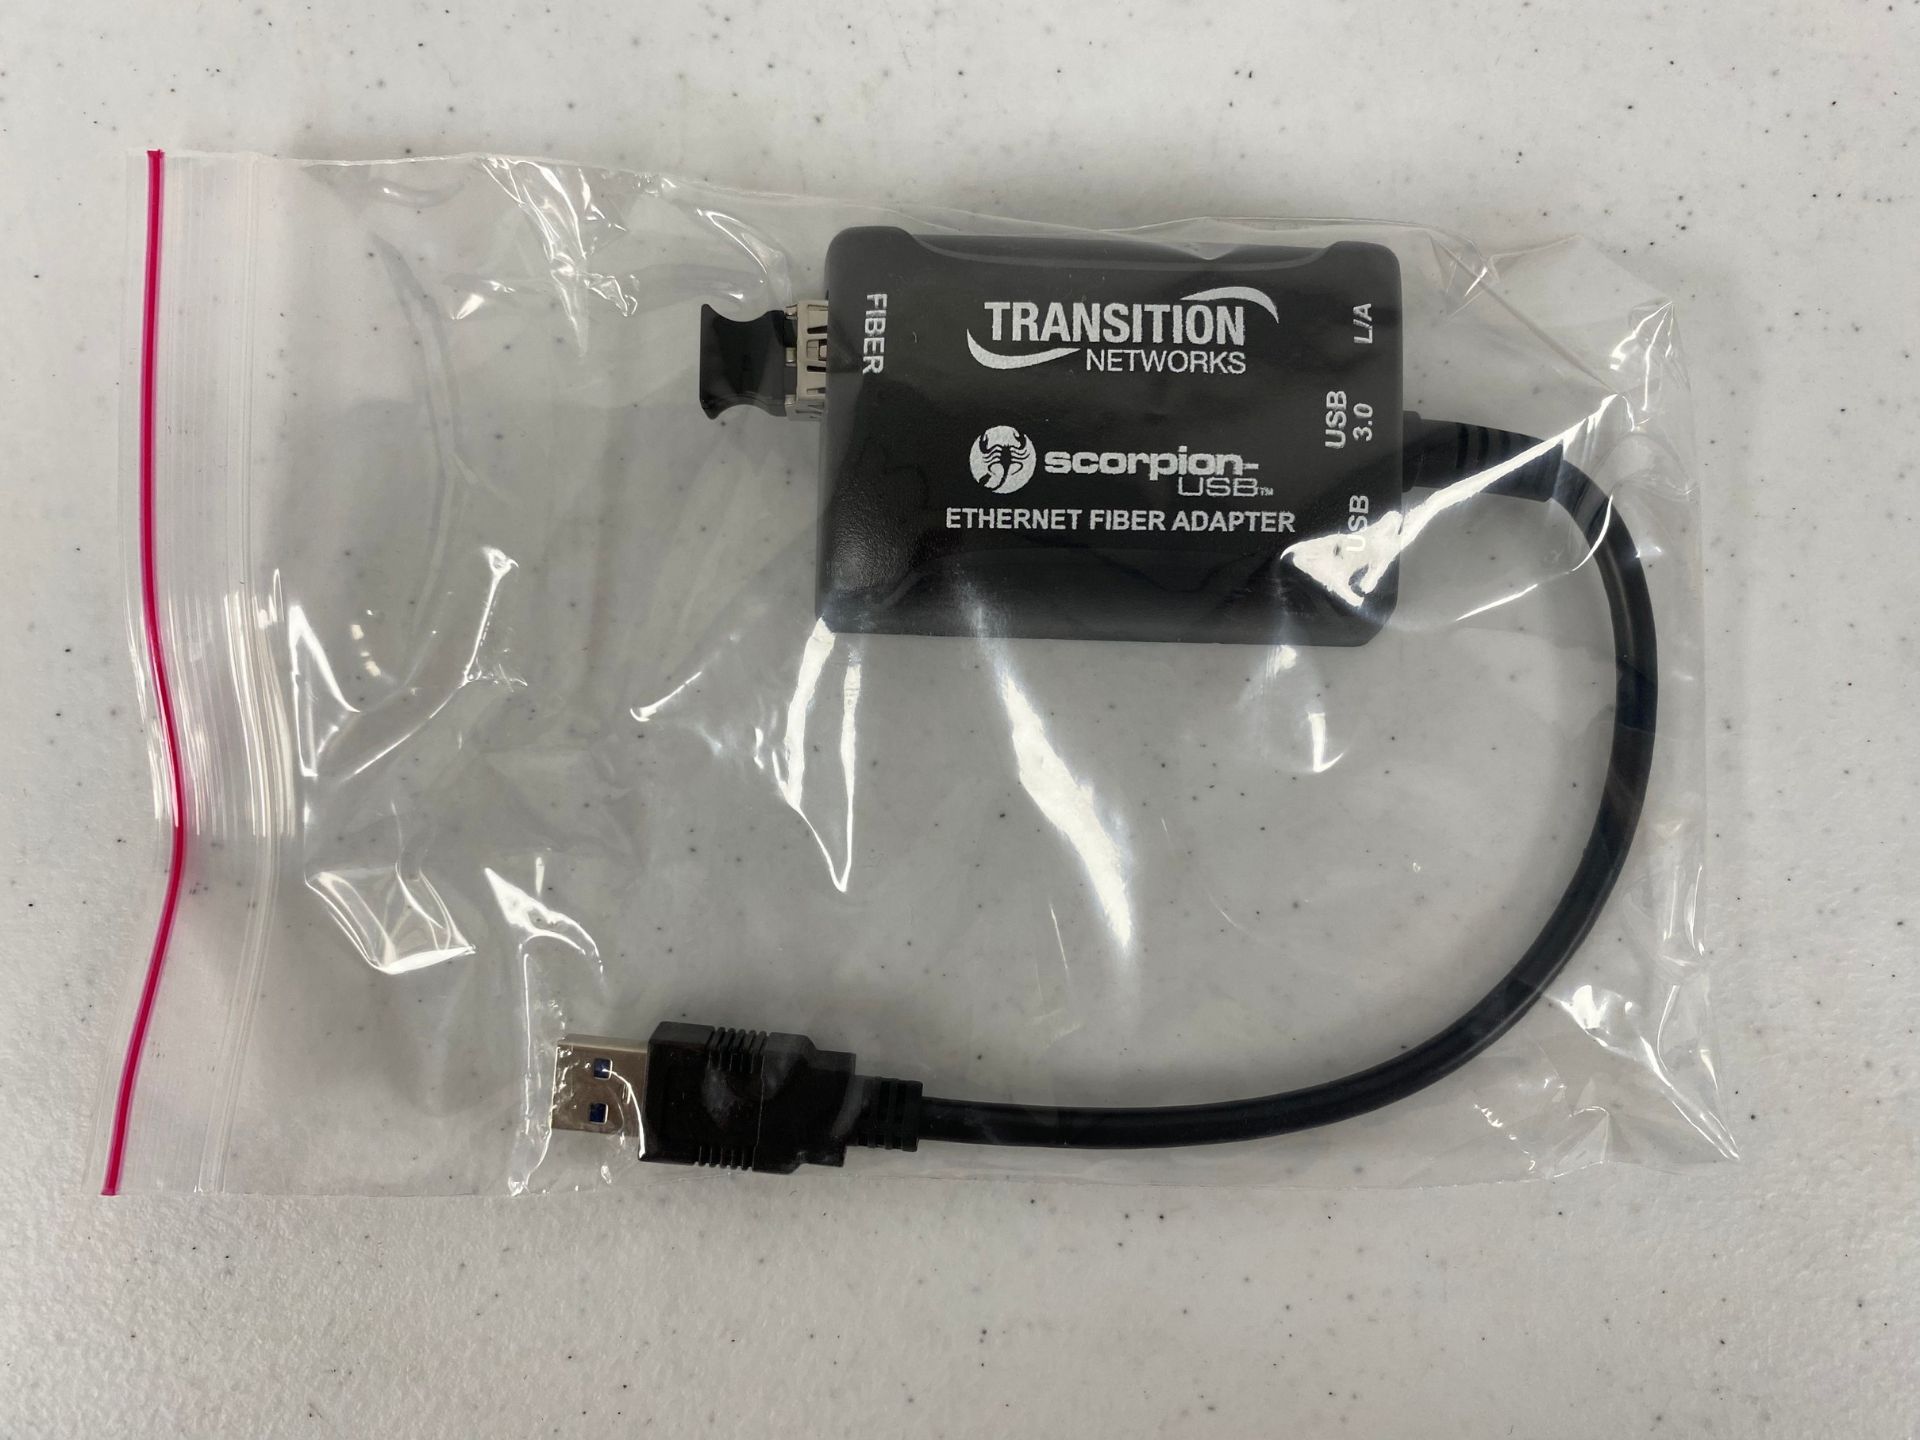 A boxed as new Transition Networks TN-USB3-SX-01(LC) Scorpion-USB 3.0 Gigabit Ethernet Fibre Adapter